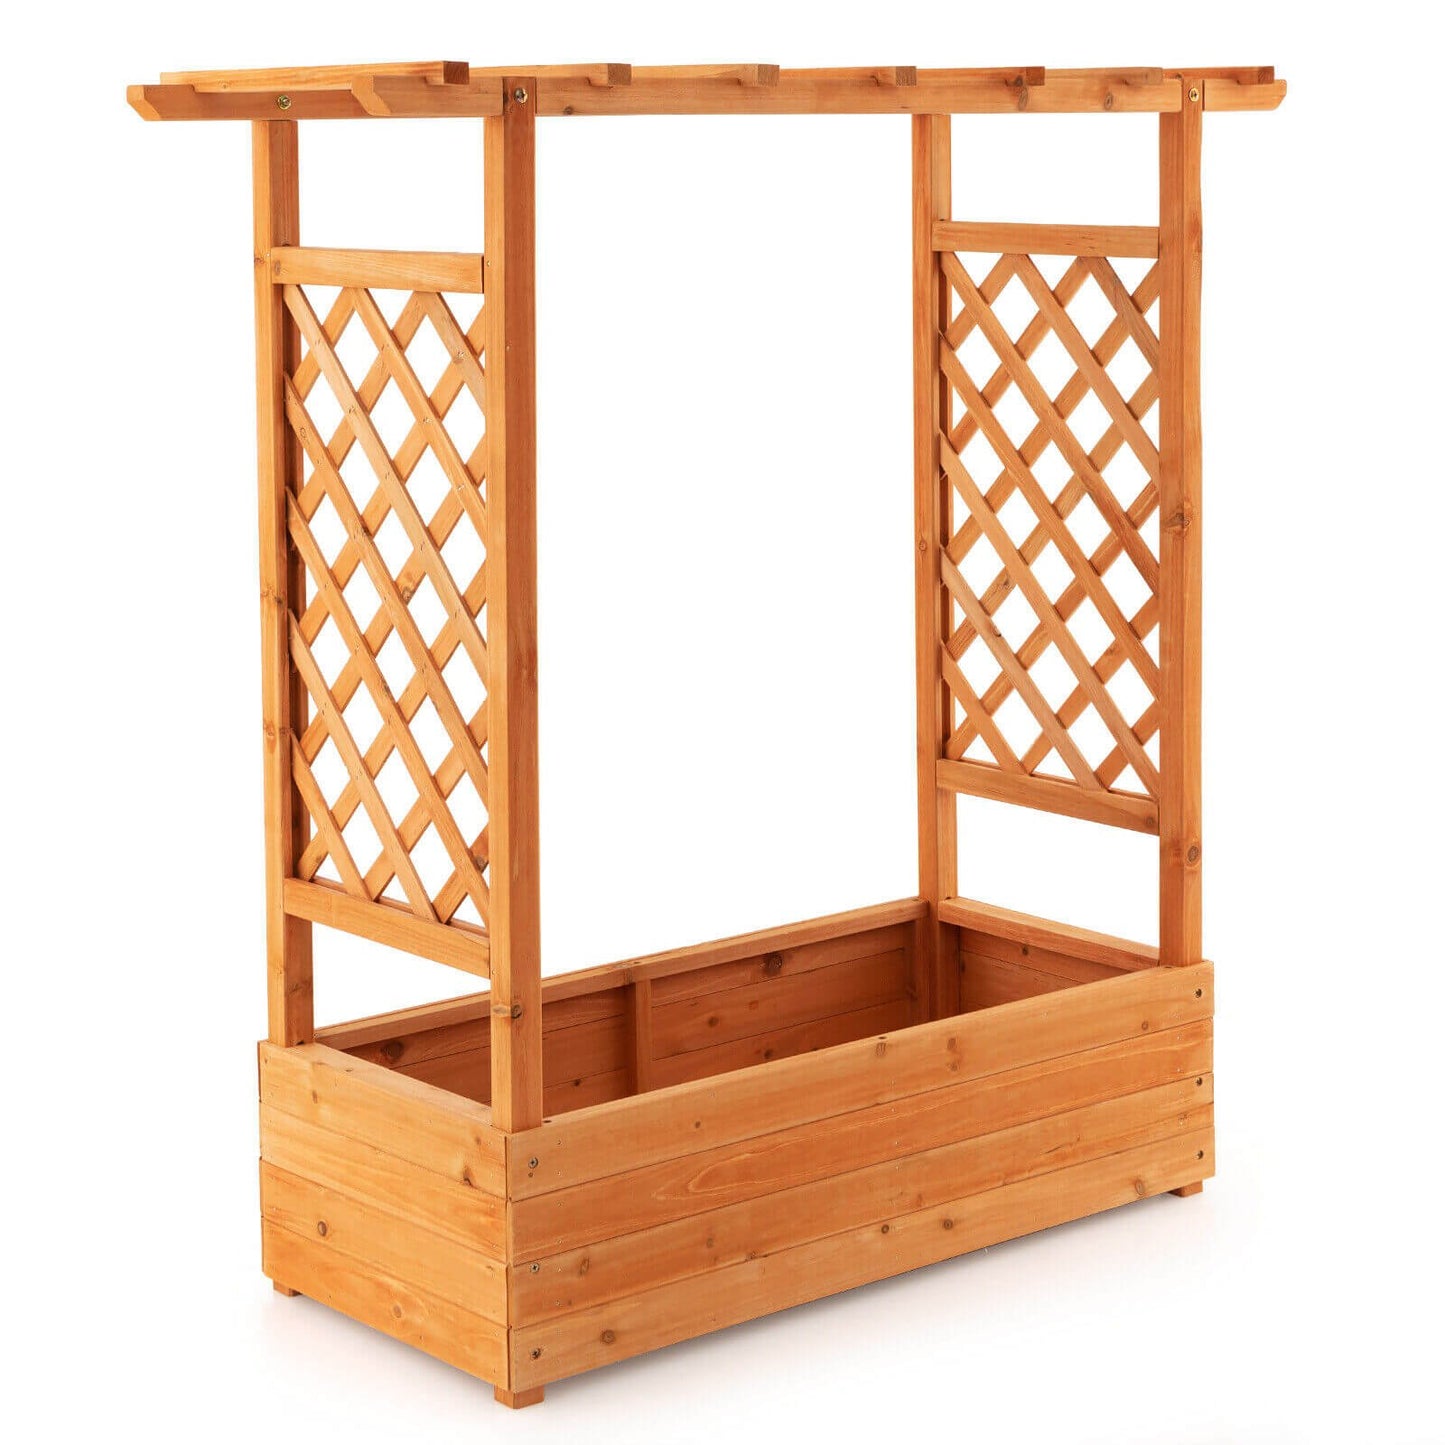 Raised Garden Bed with Trellis or Climbing Plant and Pot Hanging, Natural - Gallery Canada